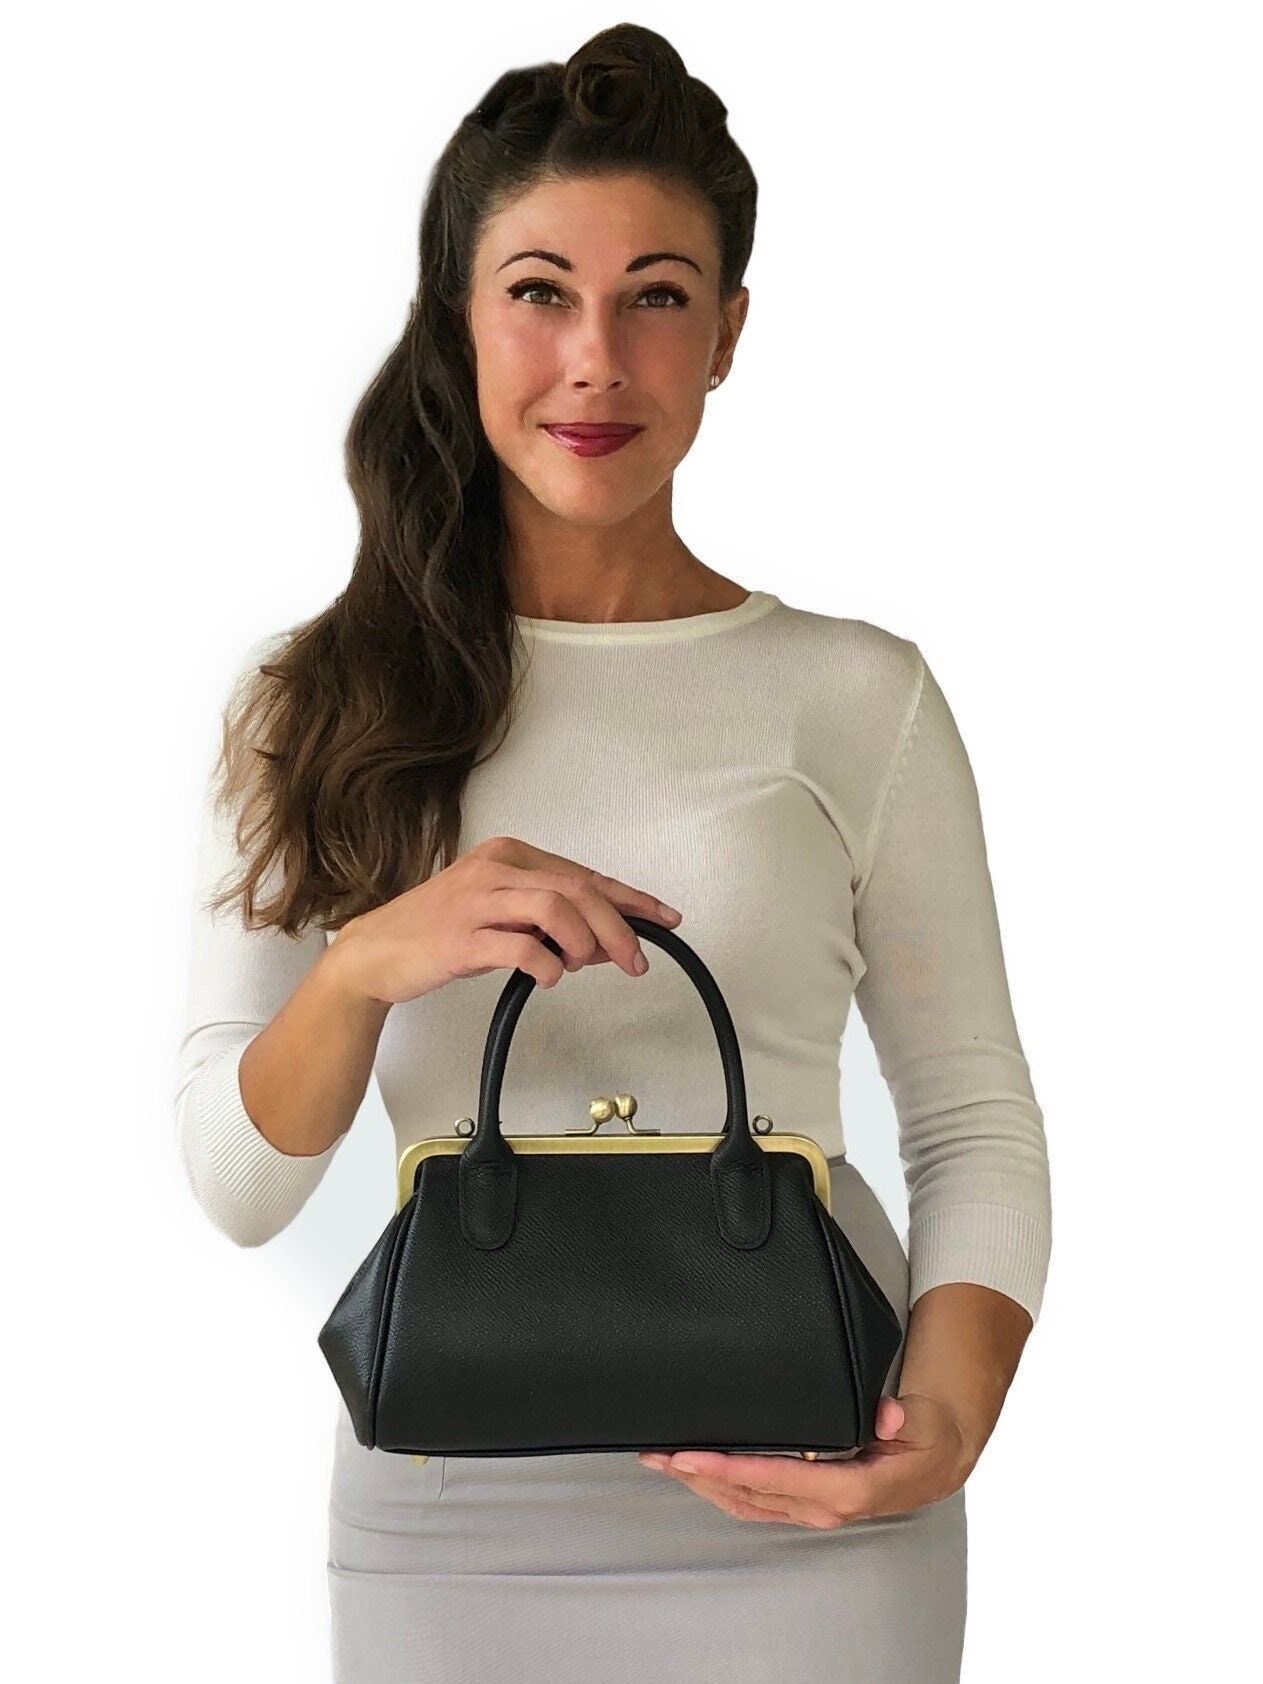 Buy ASHRY KINS White Twist Lock Top Handle Square Bag, Women Small Handbag  with Top Handle & Twist Lock, Bucket Cross Body Bag with PU Leather  Material